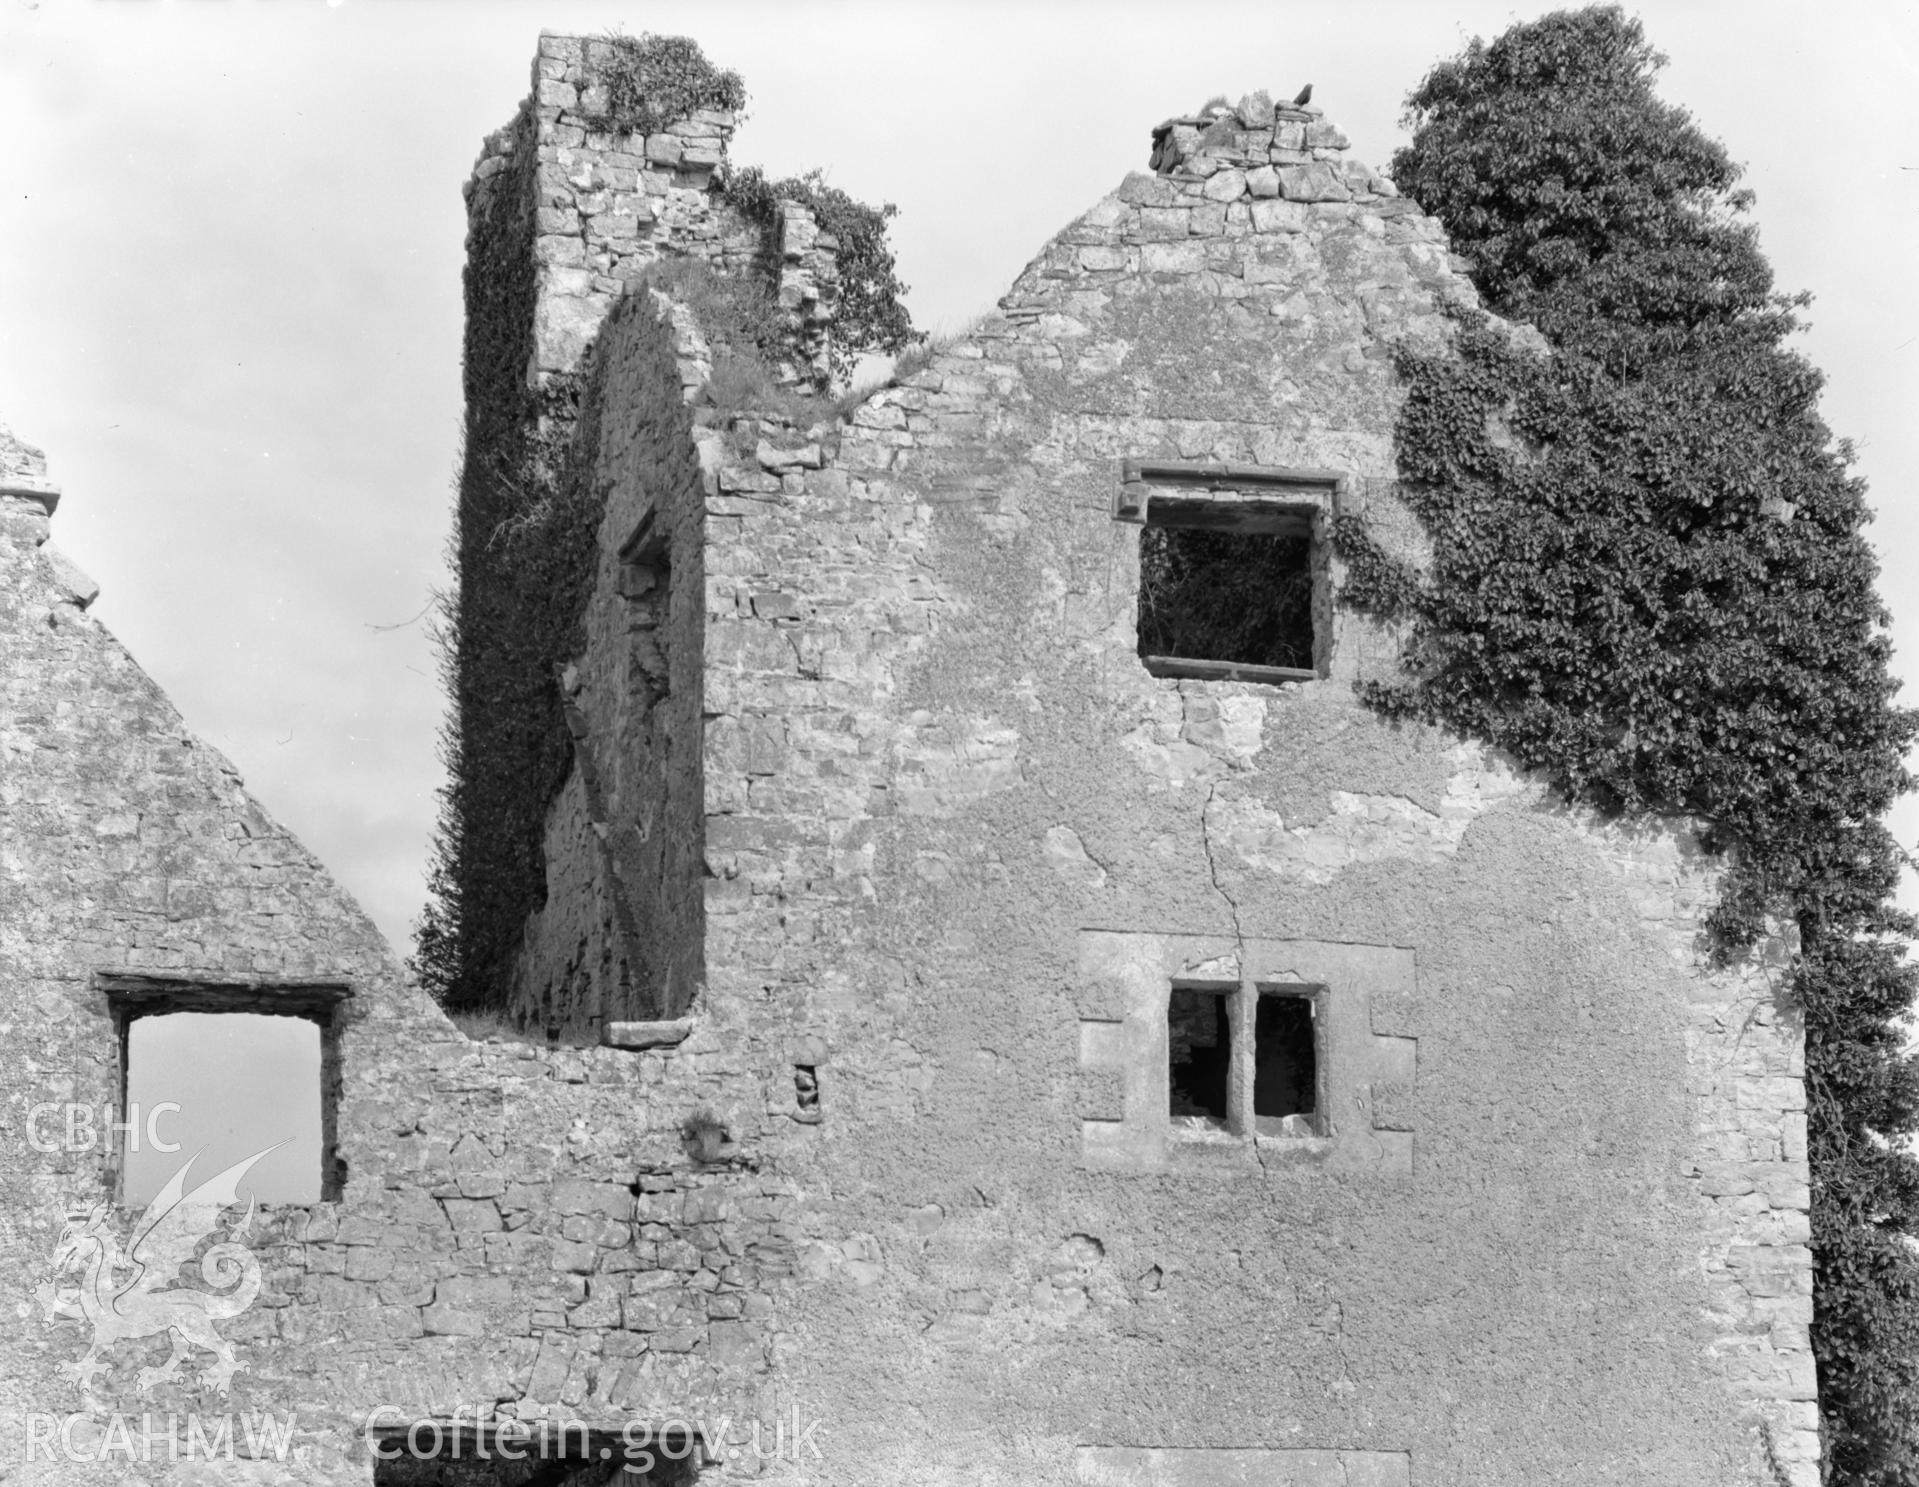 View of the tower at Boverton Place Mansion, Llanwtwit Major, taken 05.04.65.